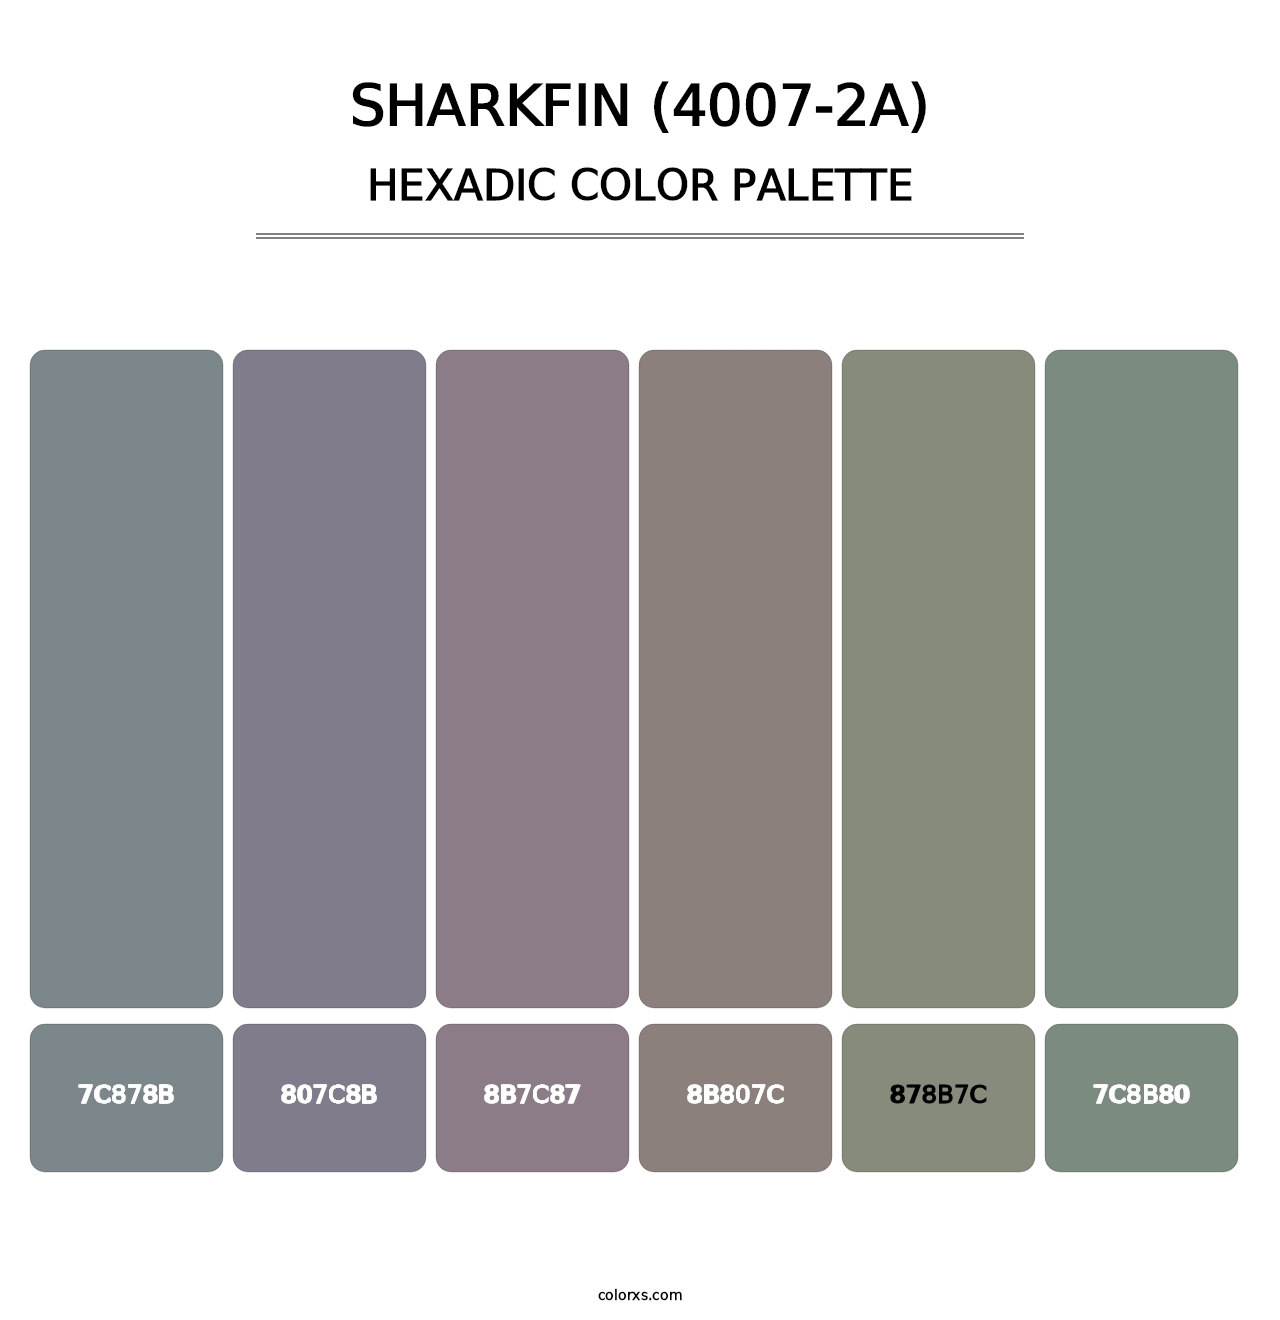 Sharkfin (4007-2A) - Hexadic Color Palette